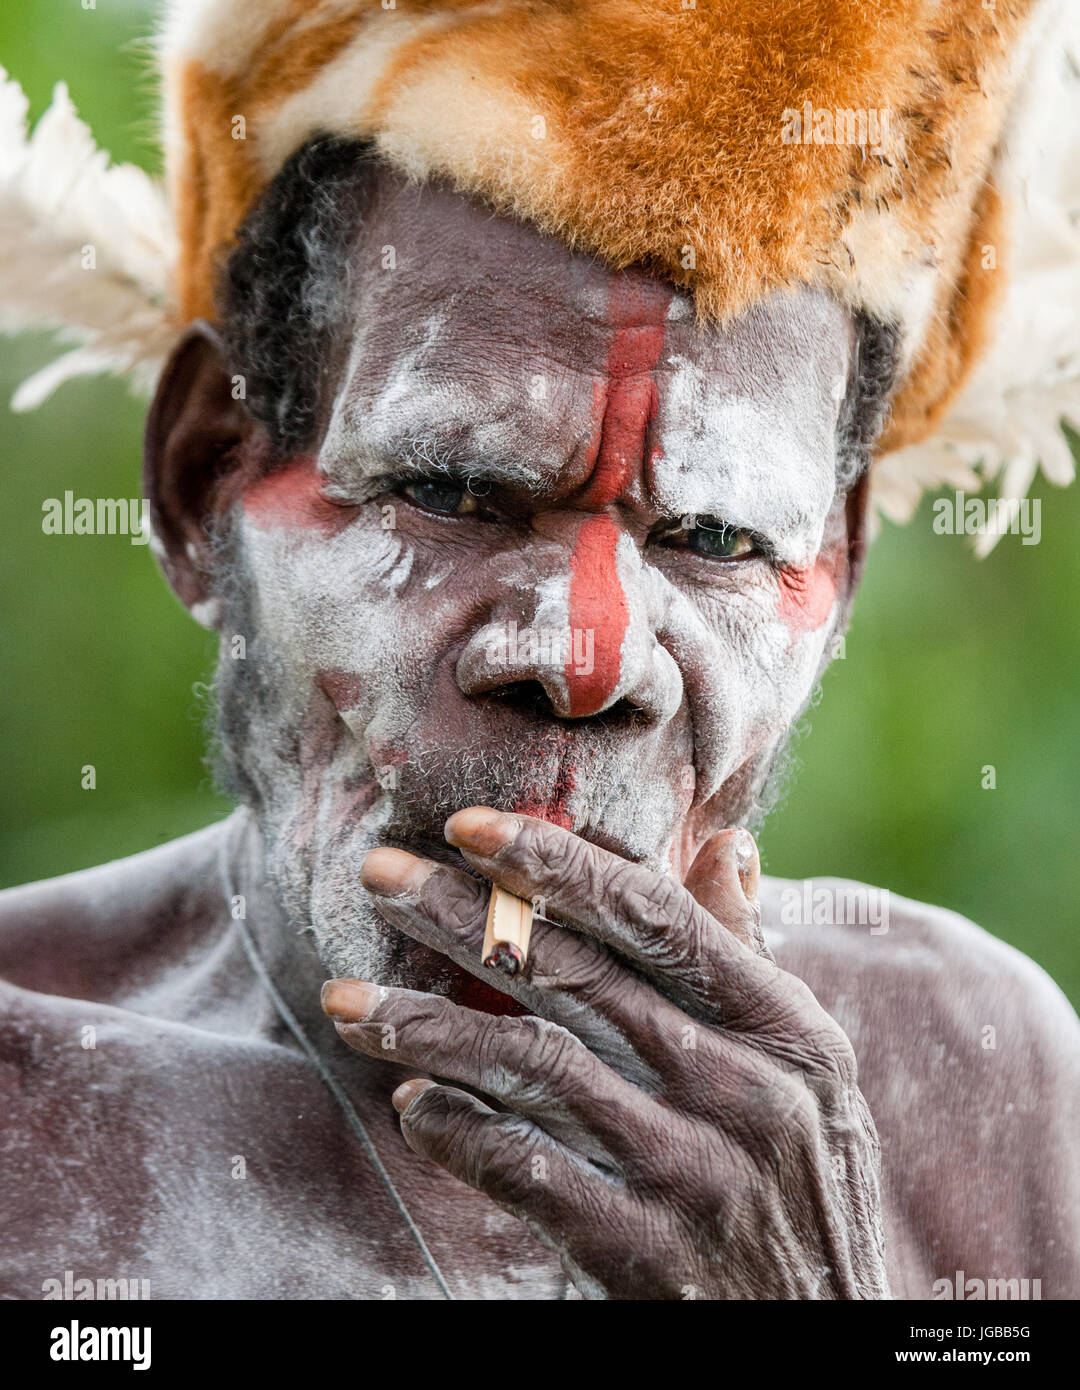 INDONESIA, IRIAN JAYA, ASMAT PROVINCE, JOW VILLAGE - JUNE 12: The Portrait Asmat warrior with a traditional painting and coloring on a face. Stock Photo